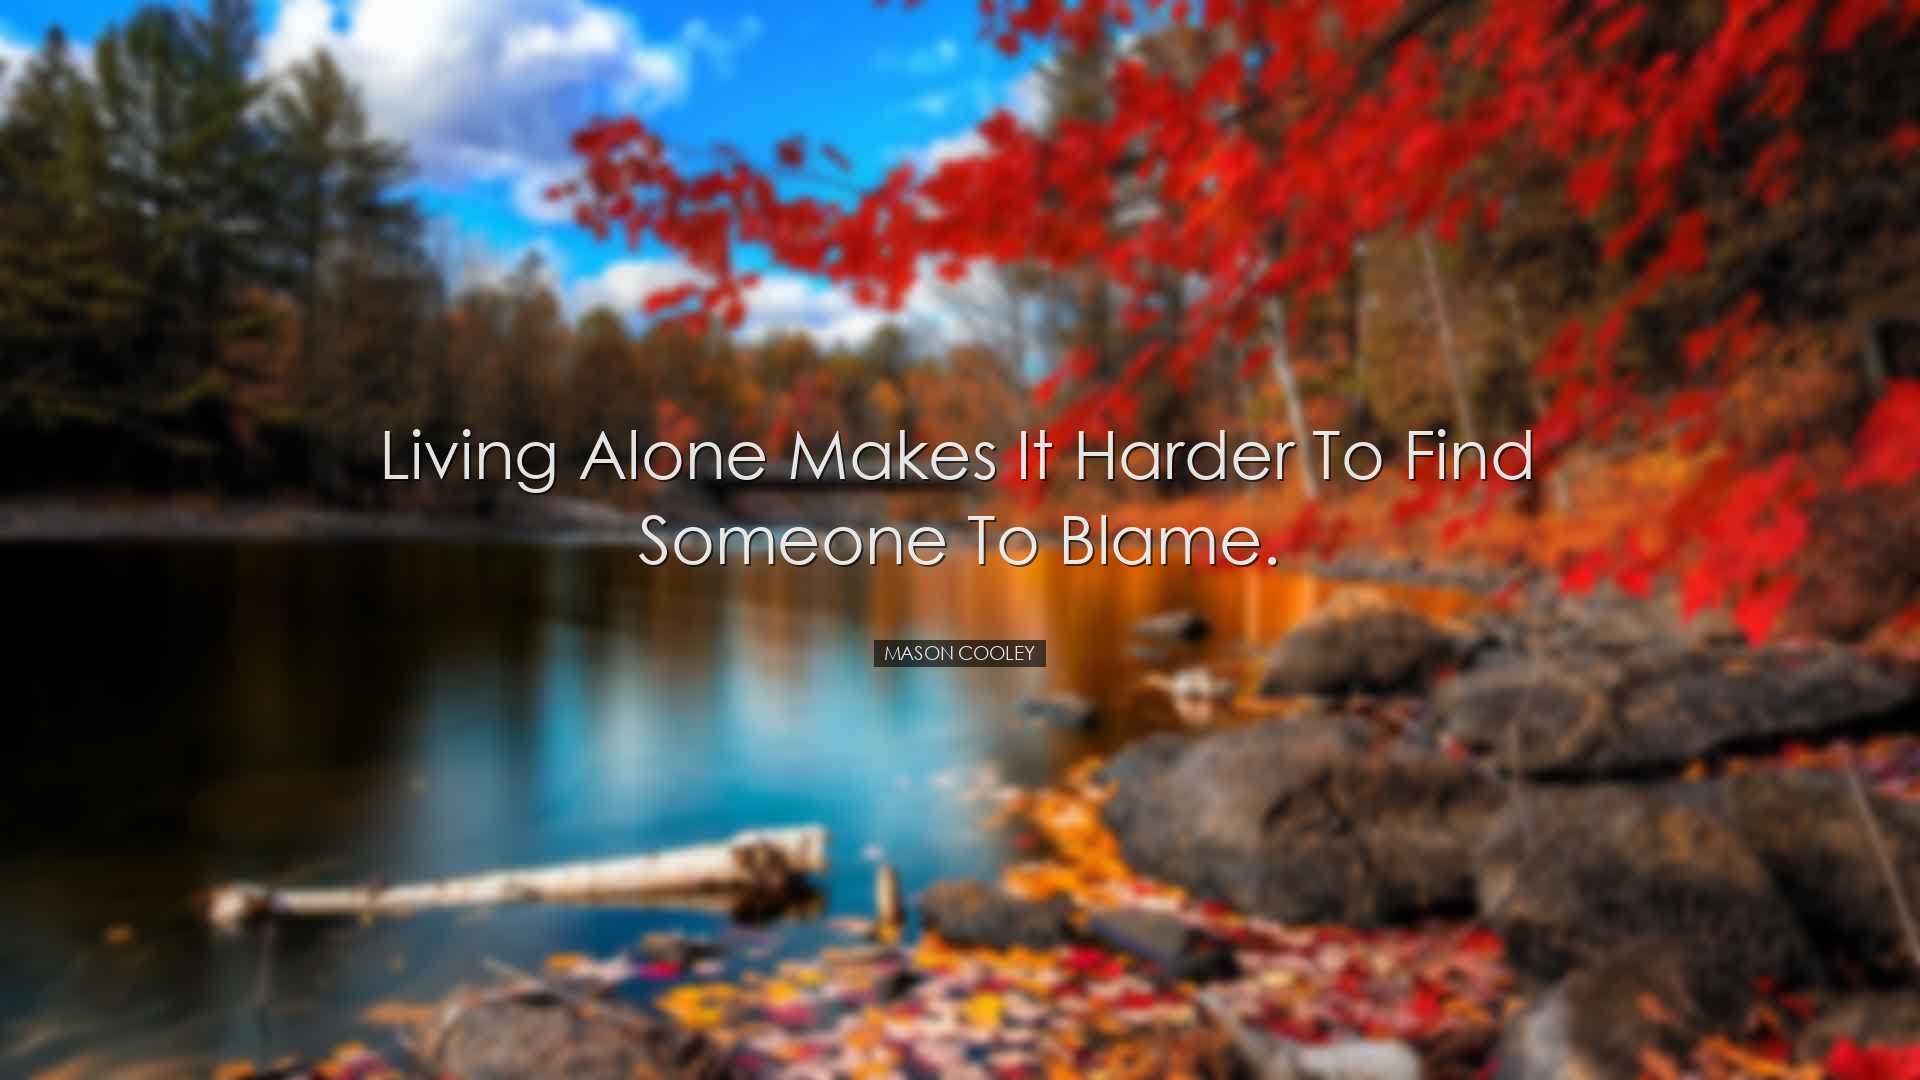 Living alone makes it harder to find someone to blame. - Mason Coo